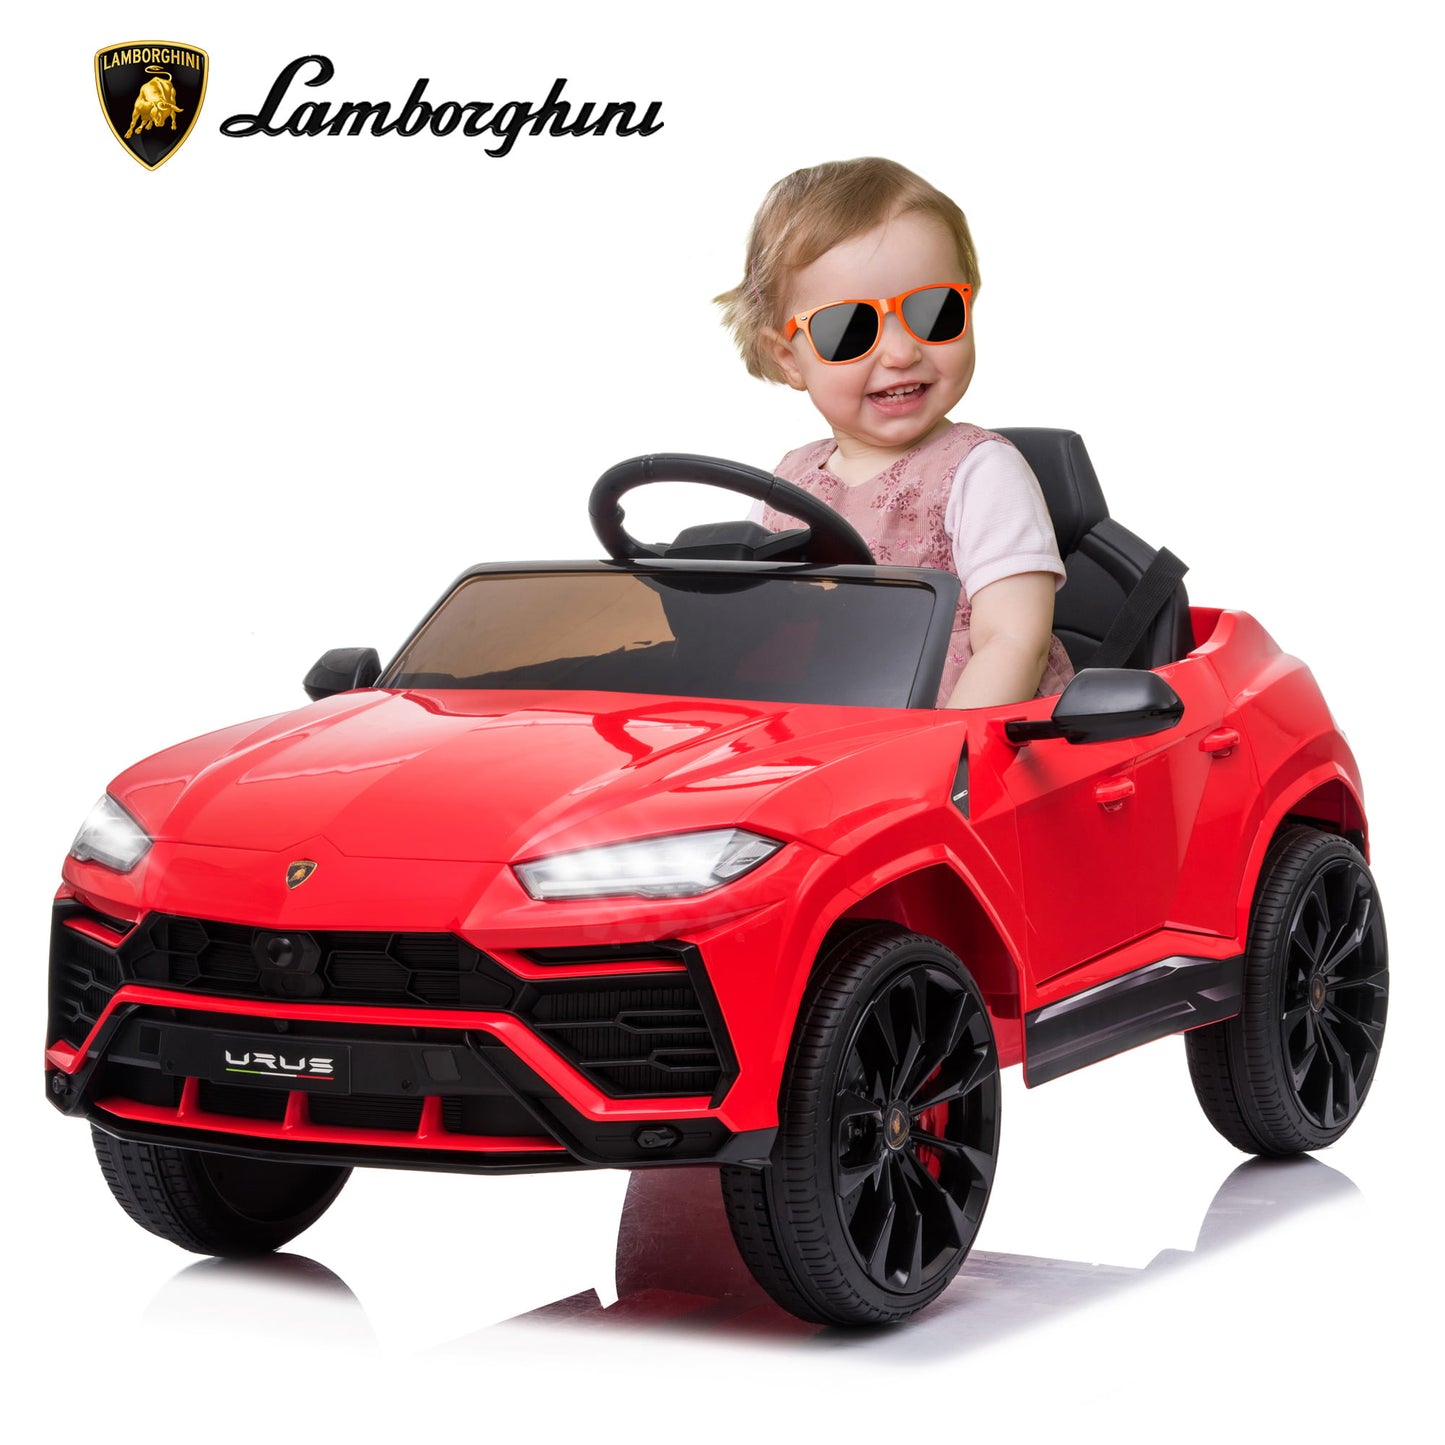 Red Ride on Car for Boys Girls, Licensed Lamborghini Toy Car Vehicle, Kids 12V Electric Ride on Toy with Remote Control, LED Lights, MP3 Player, Horn, 3 Speeds, D8473